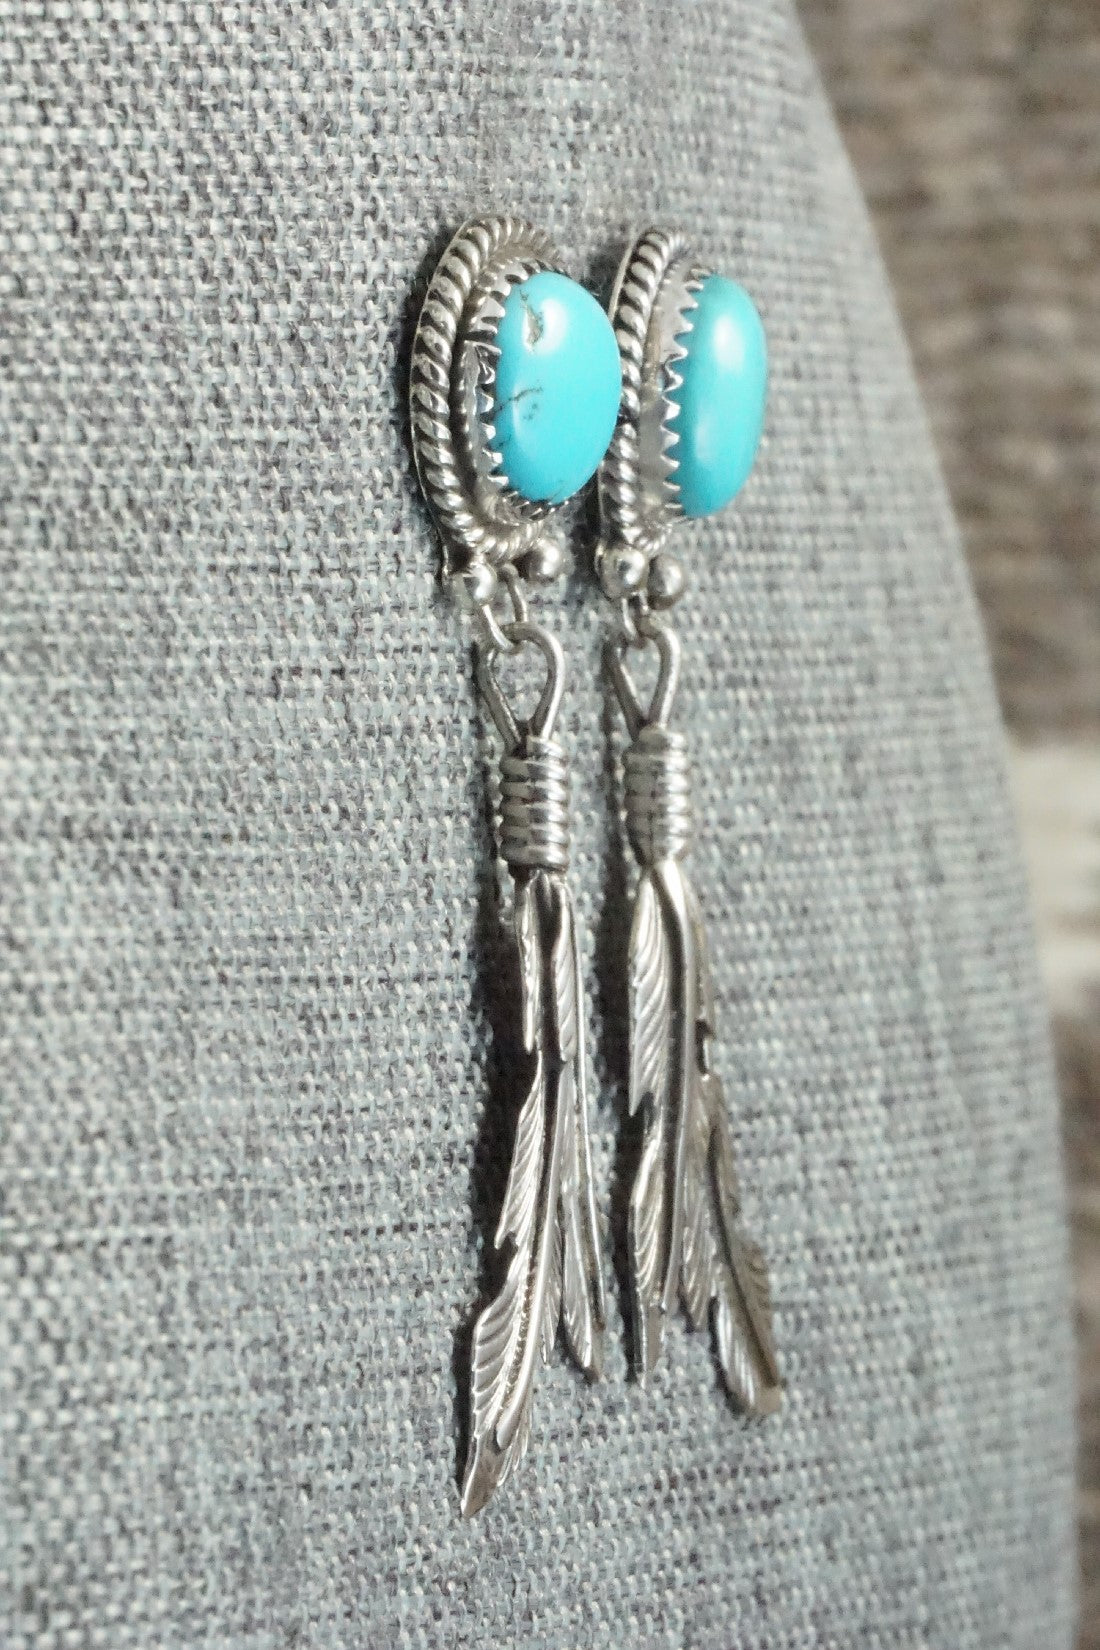 Turquoise and Sterling Silver Earrings - Annie Spencer